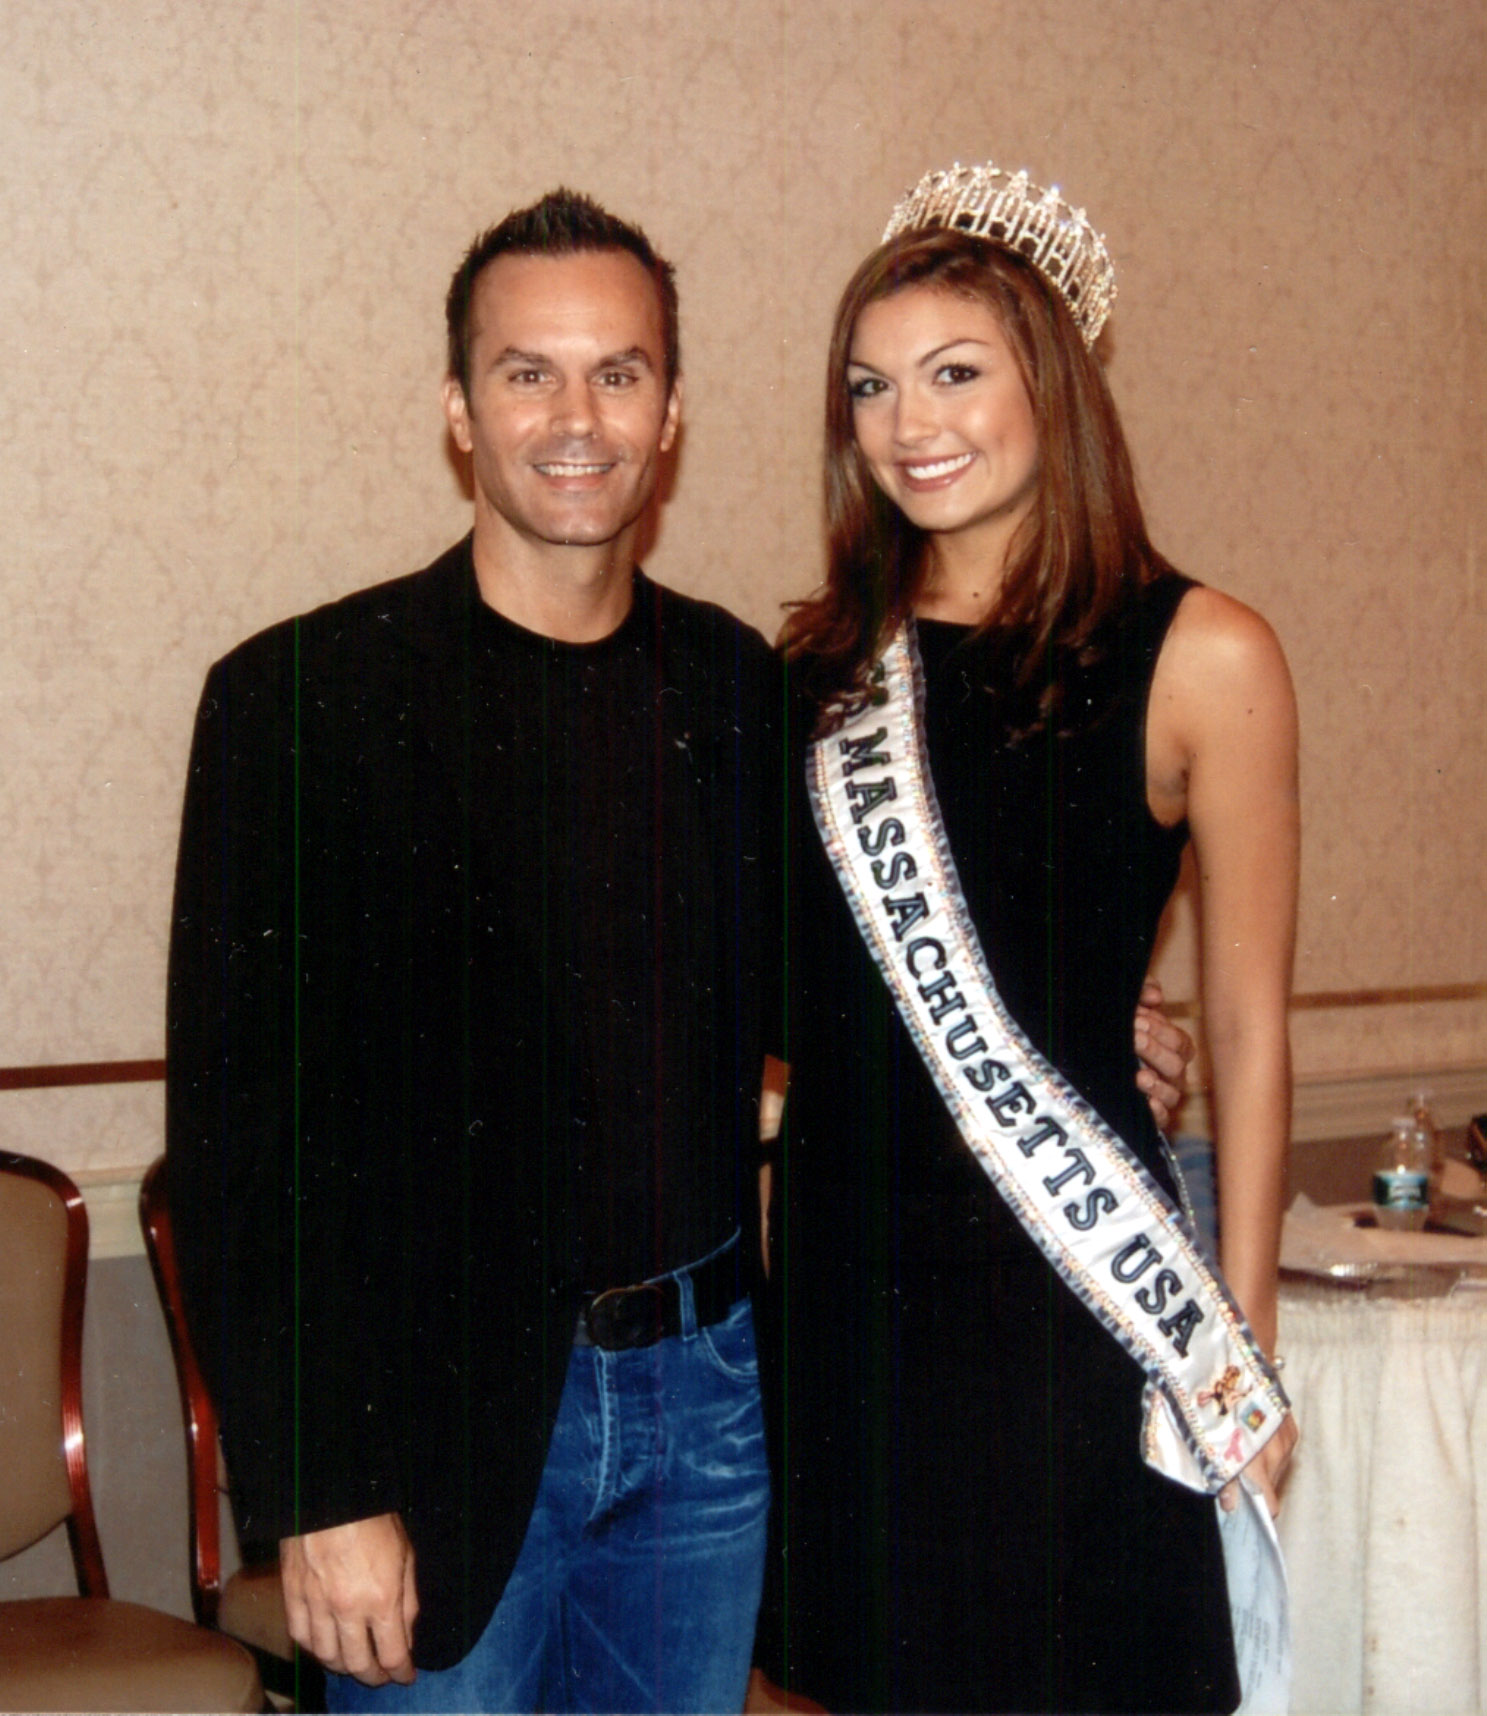 Mark Lund with Miss Massachusetts Jacqueline Bruno at a taping of Hollywood New England.